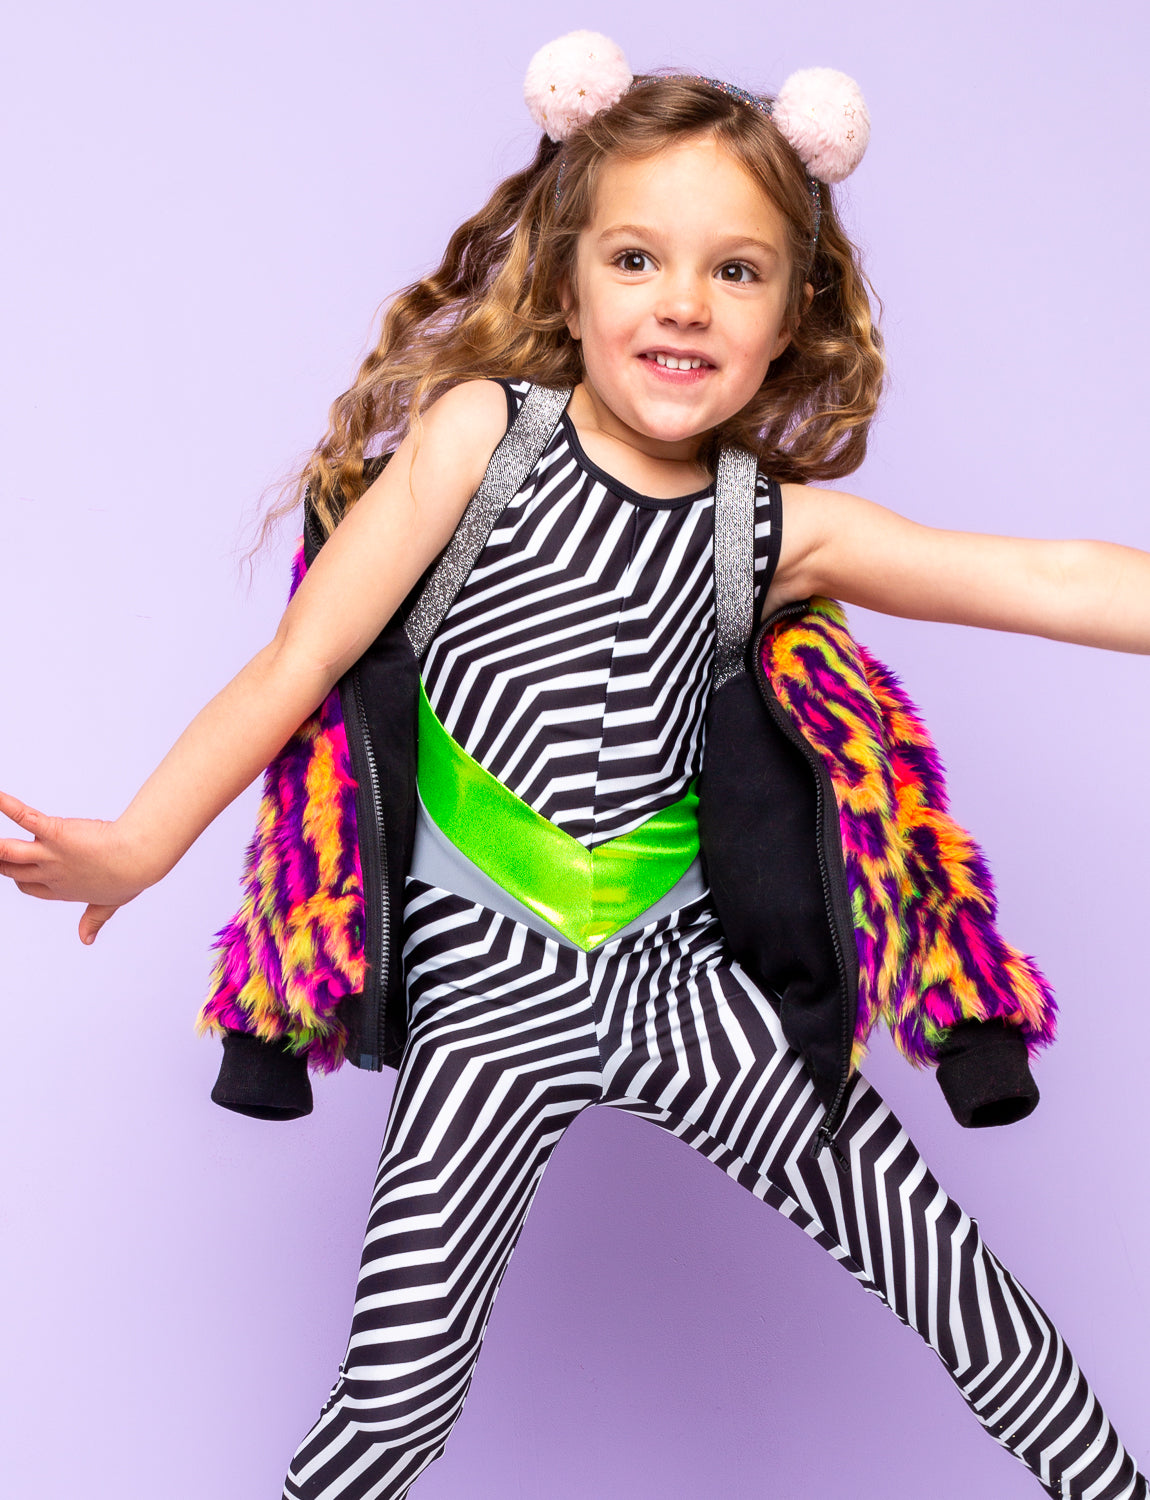 Girl wearing a black and white striped catsuit with lime green panels..